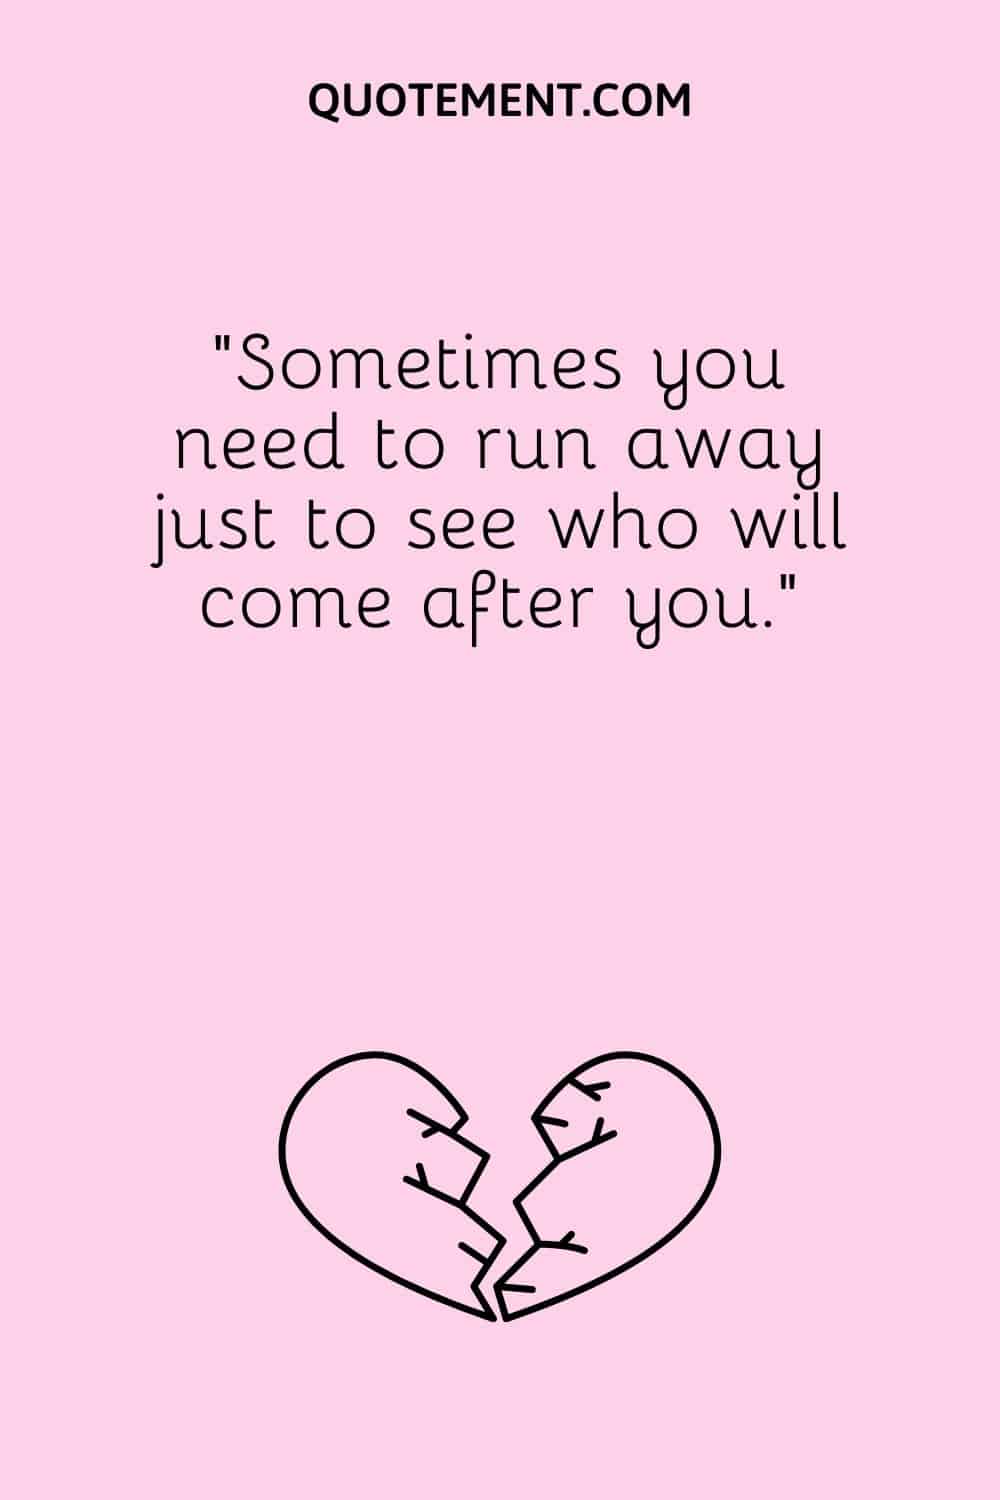 “Sometimes you need to run away just to see who will come after you.”